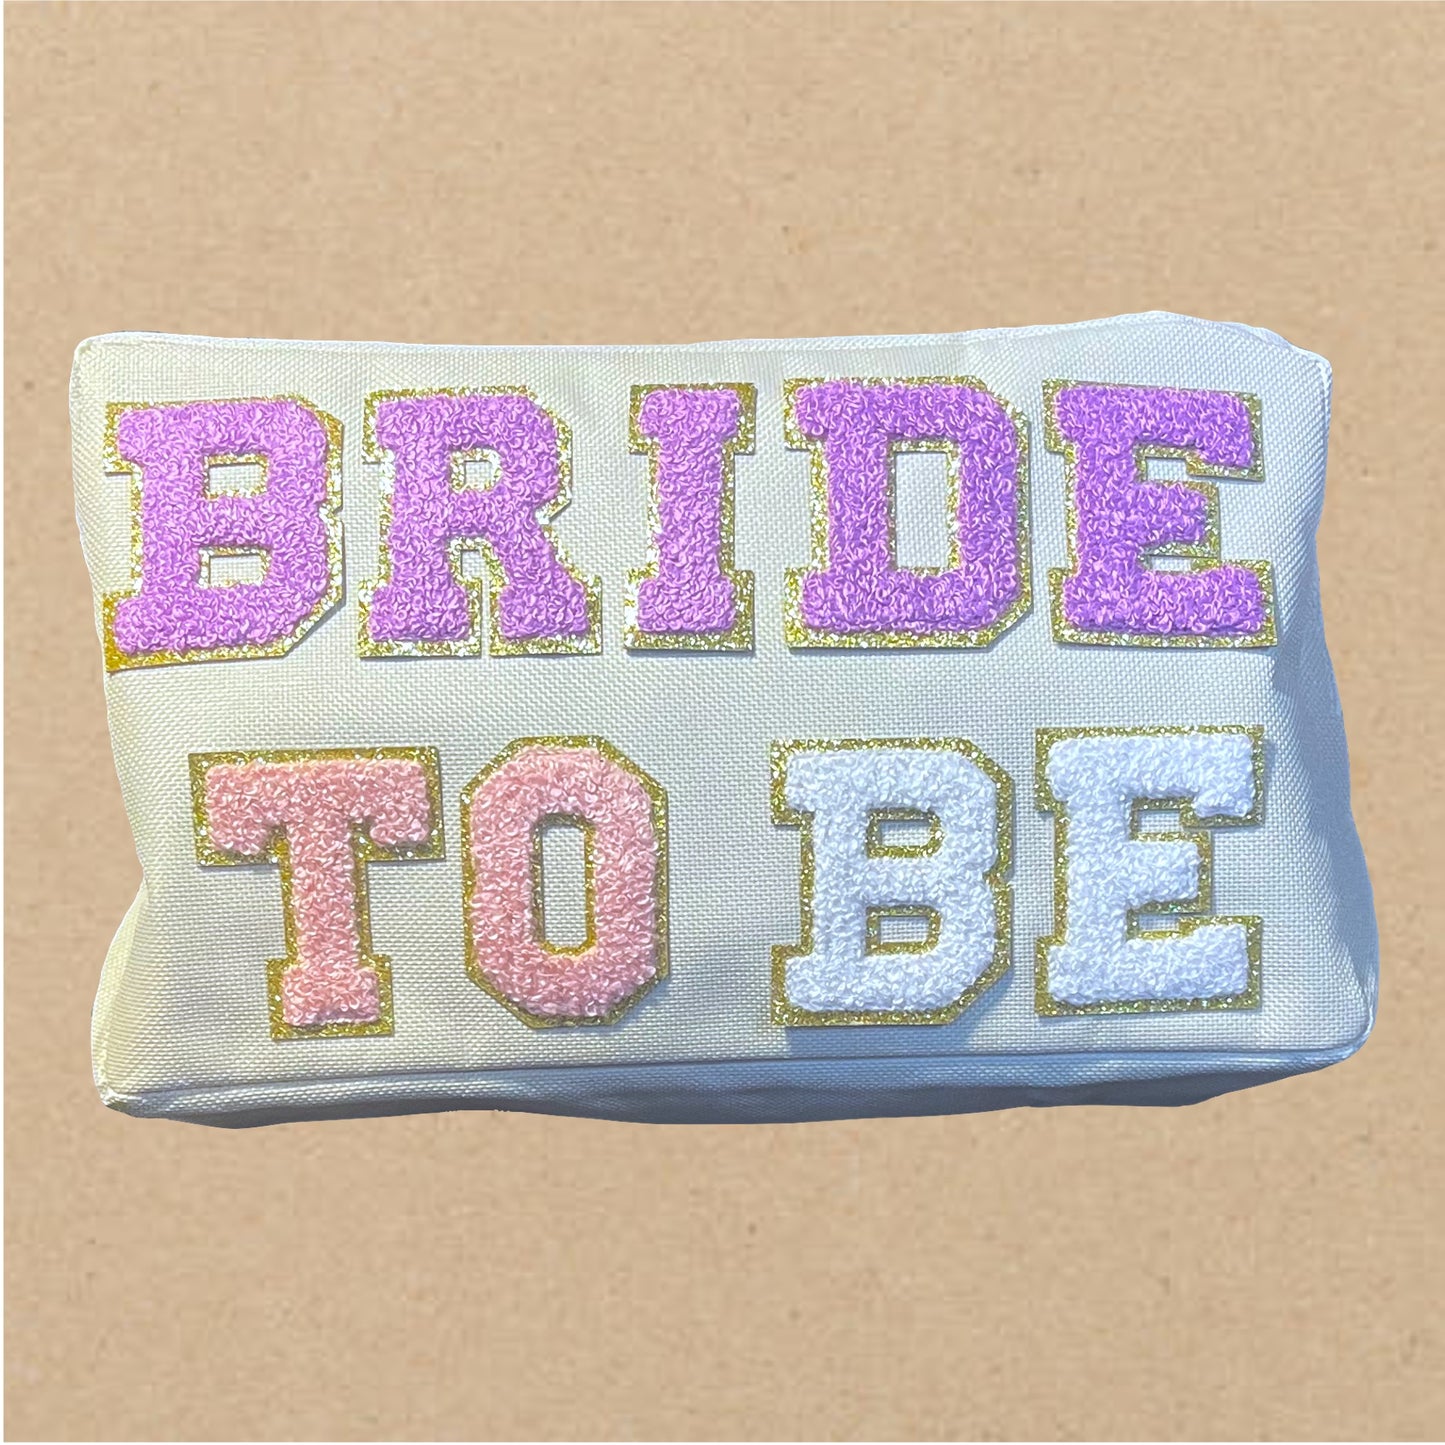 Off-White Canvas BRIDE TO BE MAKEUP BAG